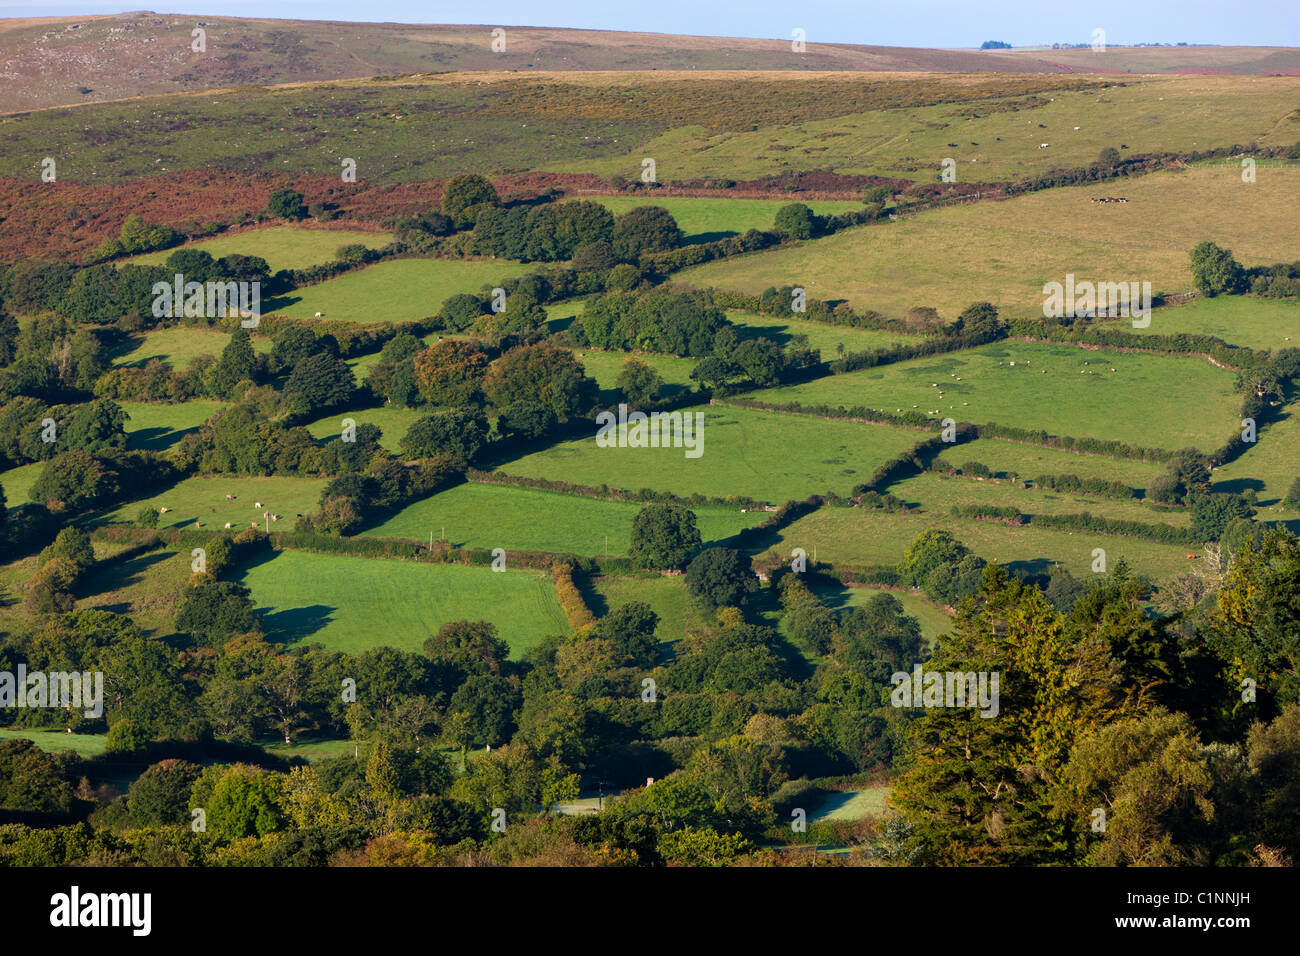 Patchwork fields in countryside. Widecombe in the Moor, Devon, England, United Kingdom, Europe Stock Photo